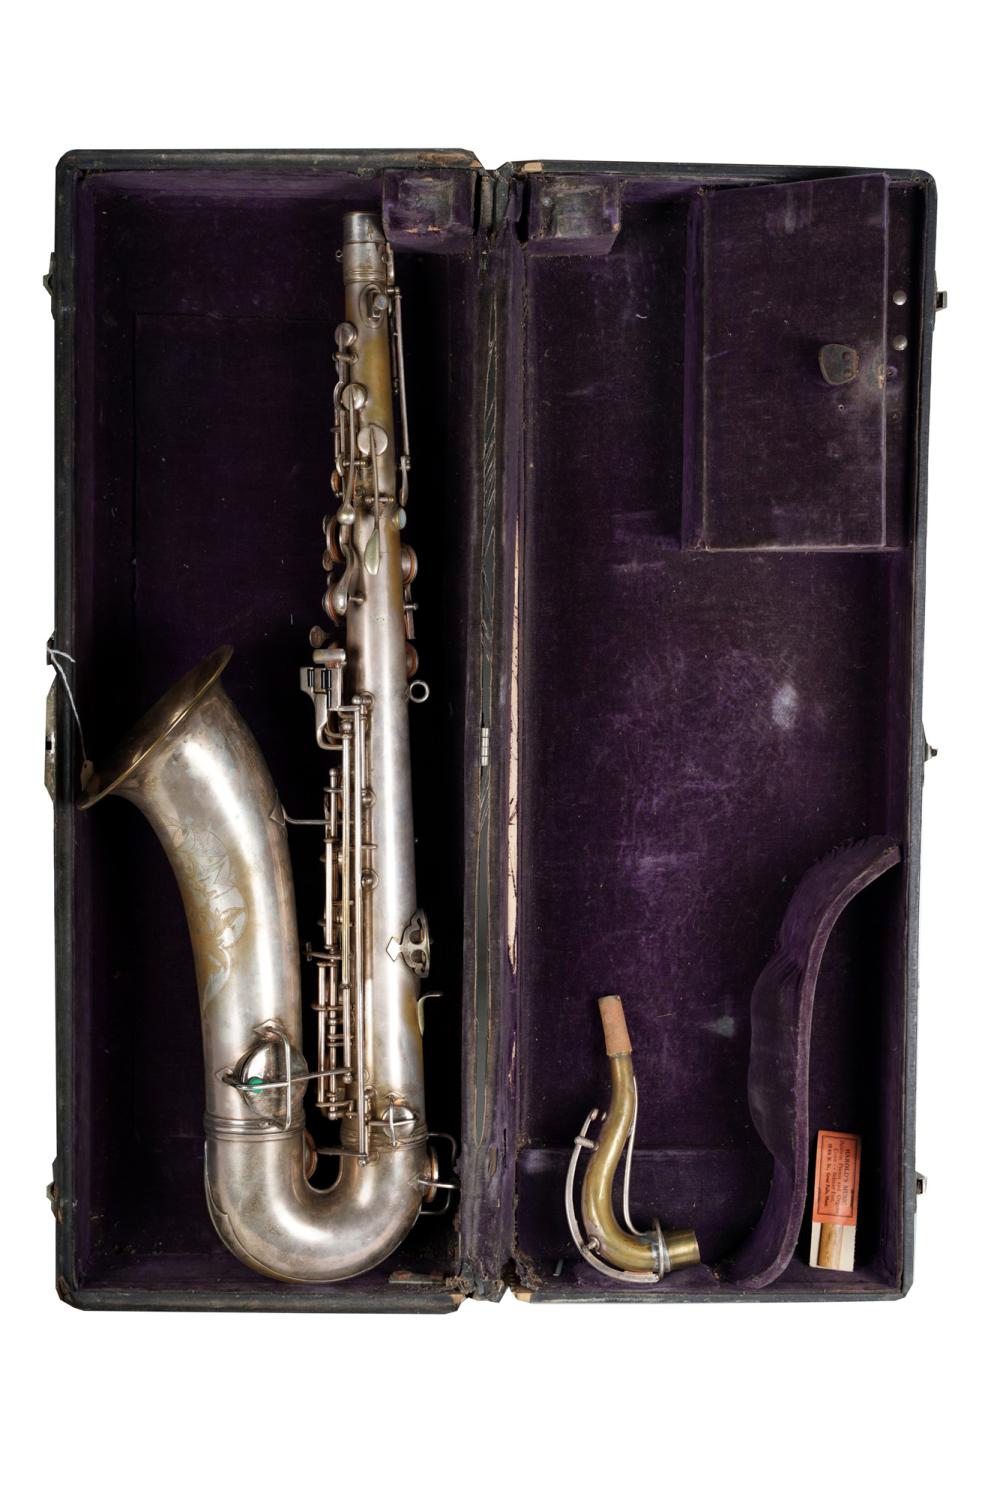 C.F. CONN: SAXOPHONEcirca 1917 in fitted